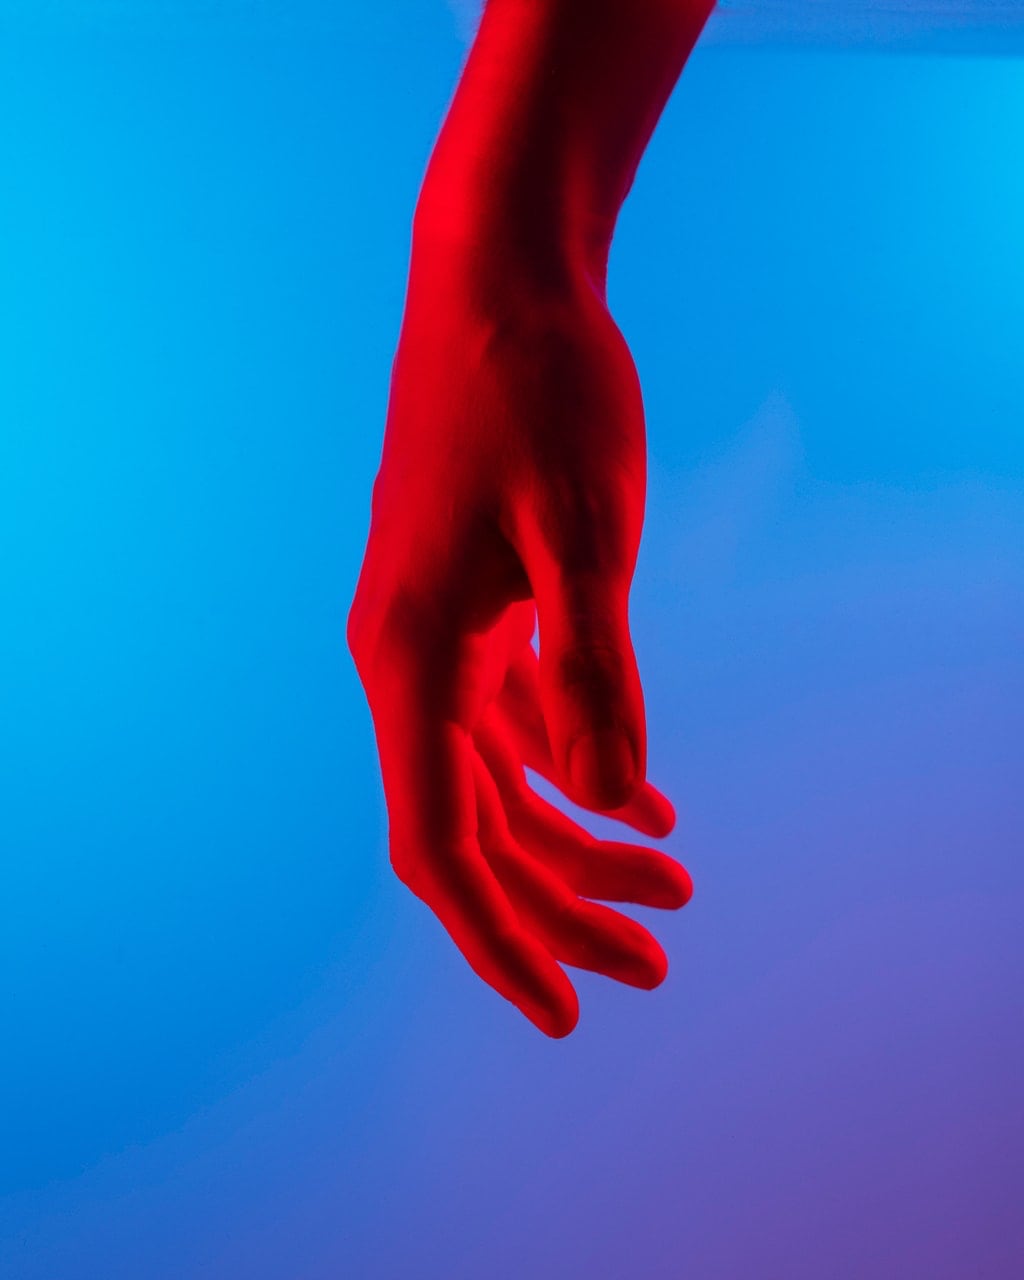 Photo of right hand lit red against blue background.